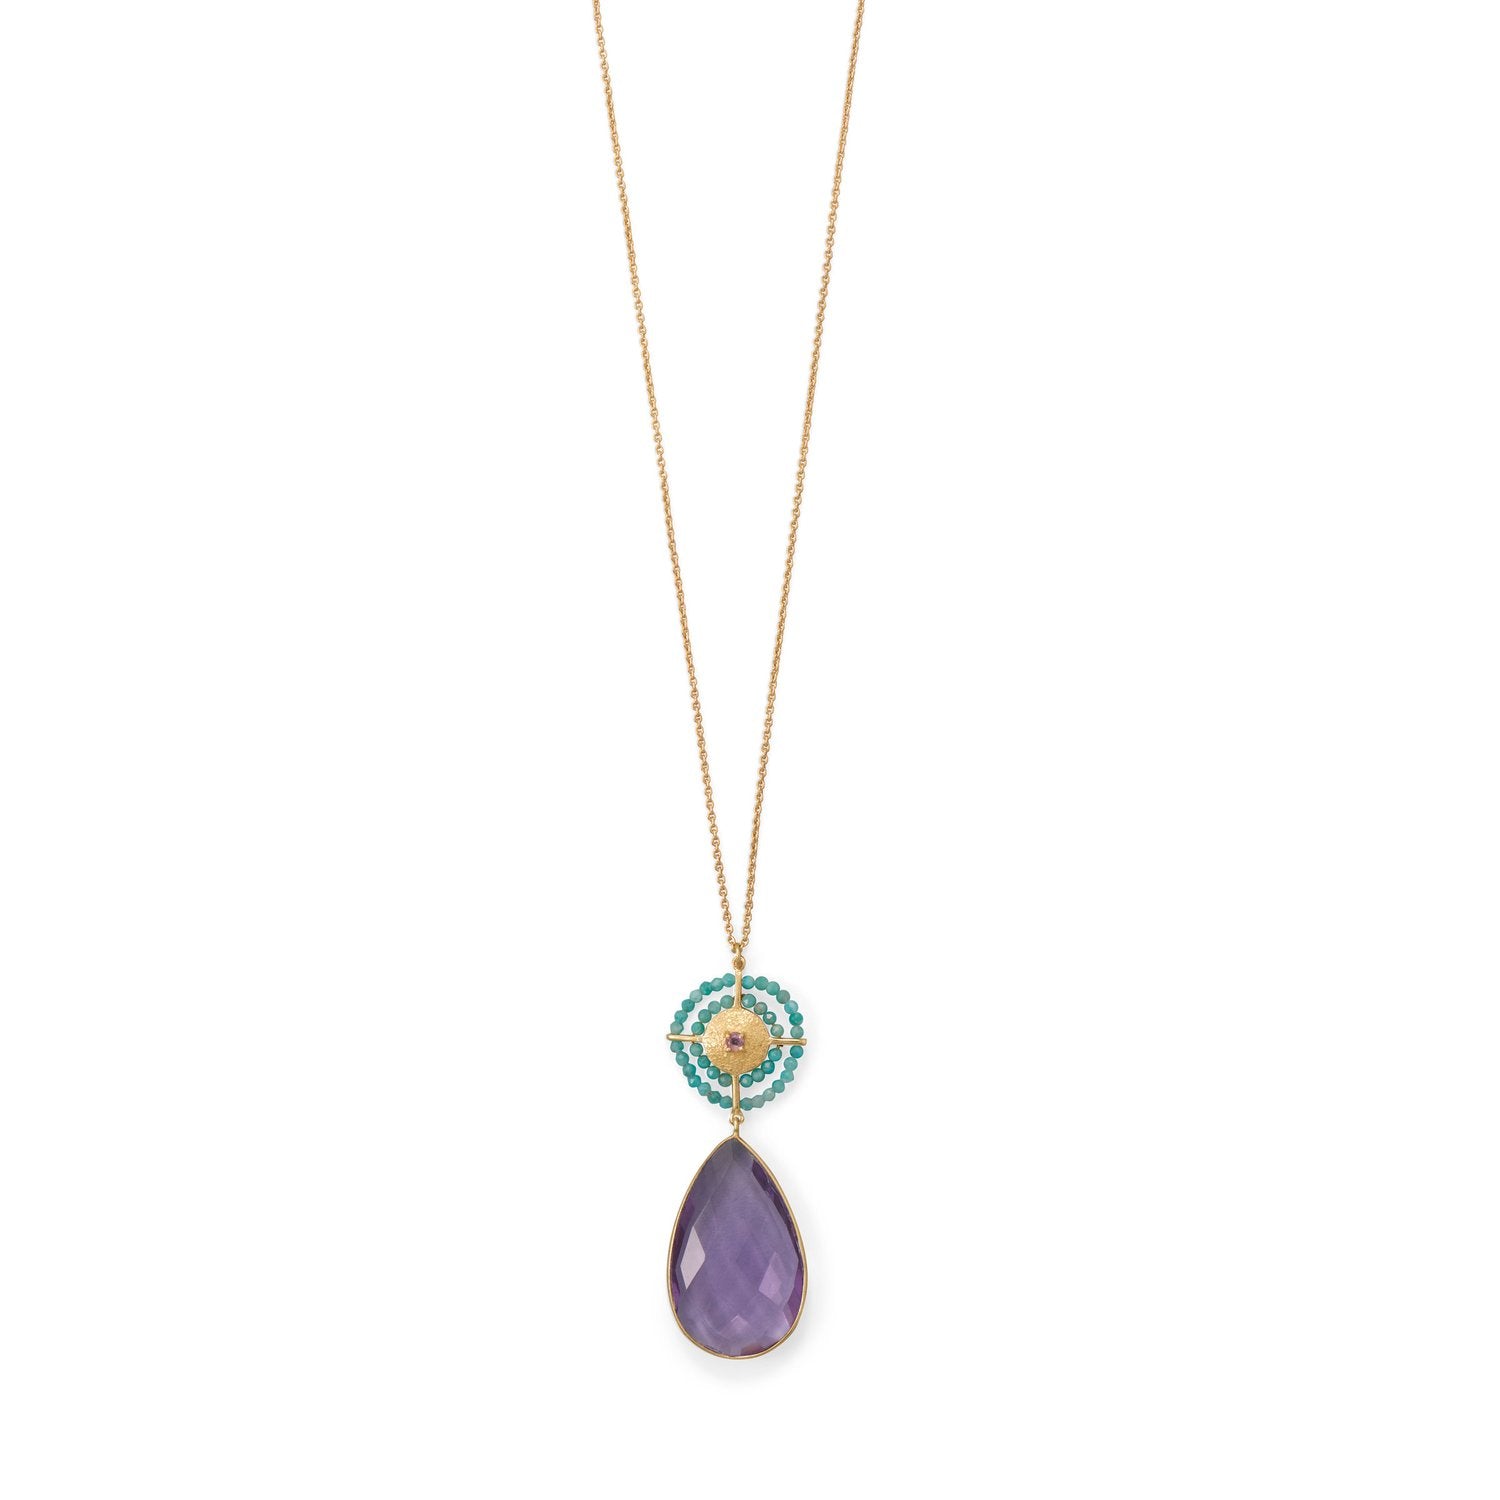 32" 14 Karat Gold Plated Amethyst and Amazonite Necklace